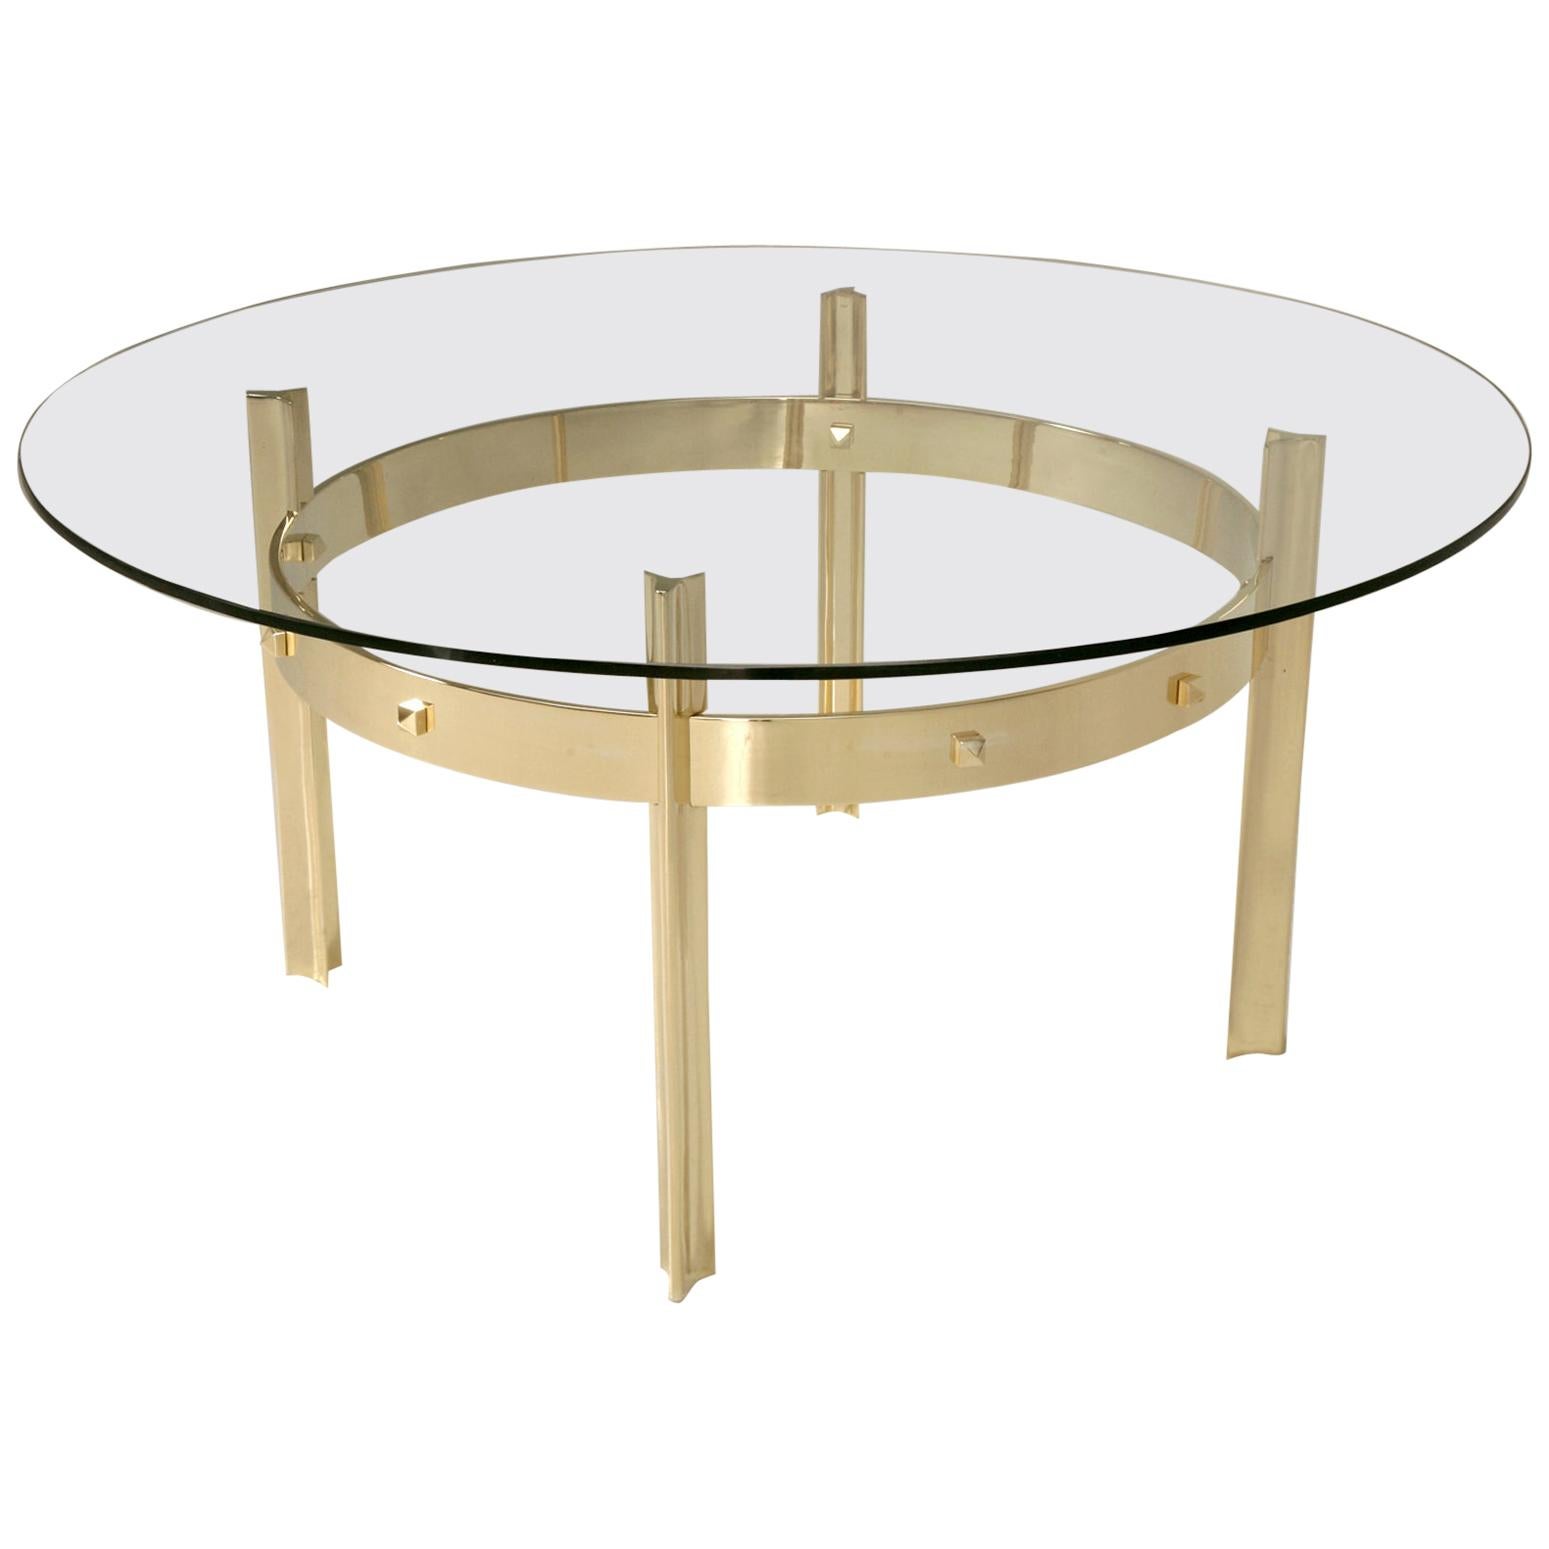 Custom Handmade Modern Polished Brass and Glass Coffee Table or Dining Table